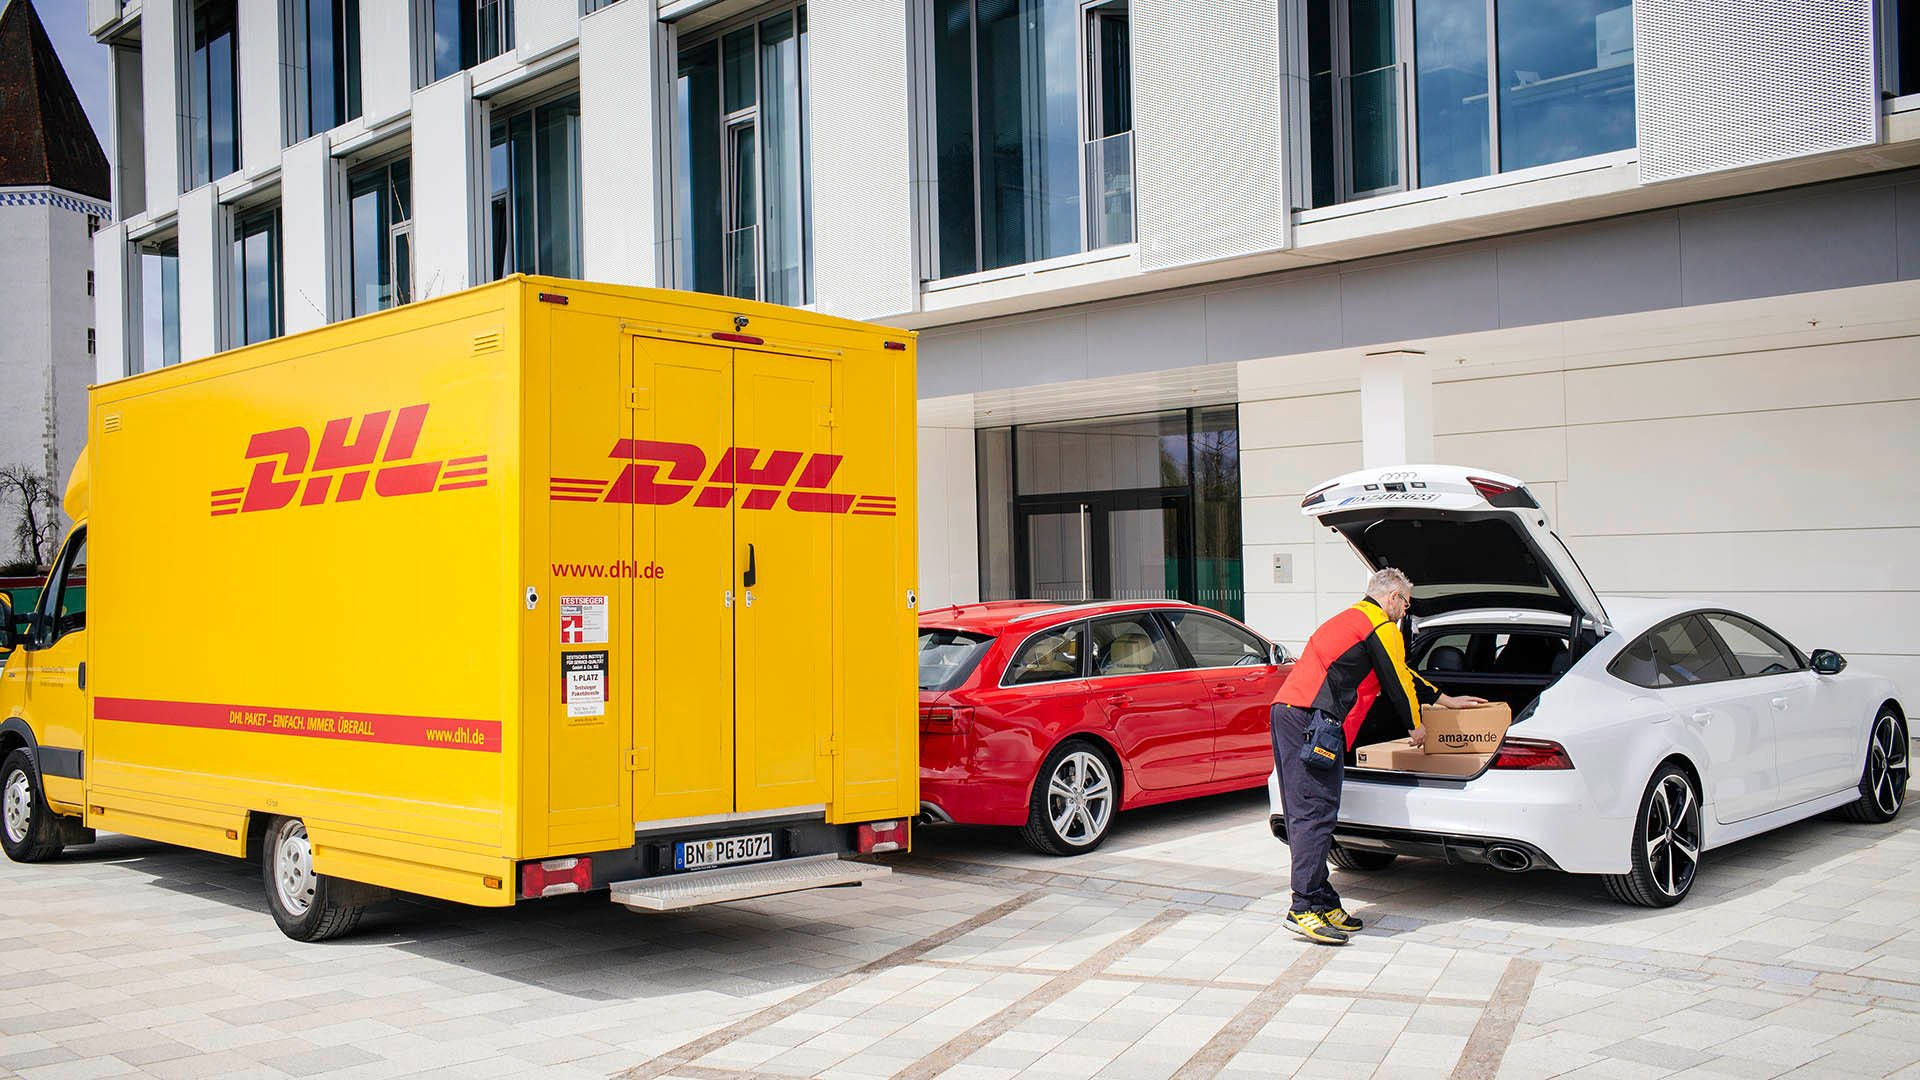 Dhl Hands On Delivery Background